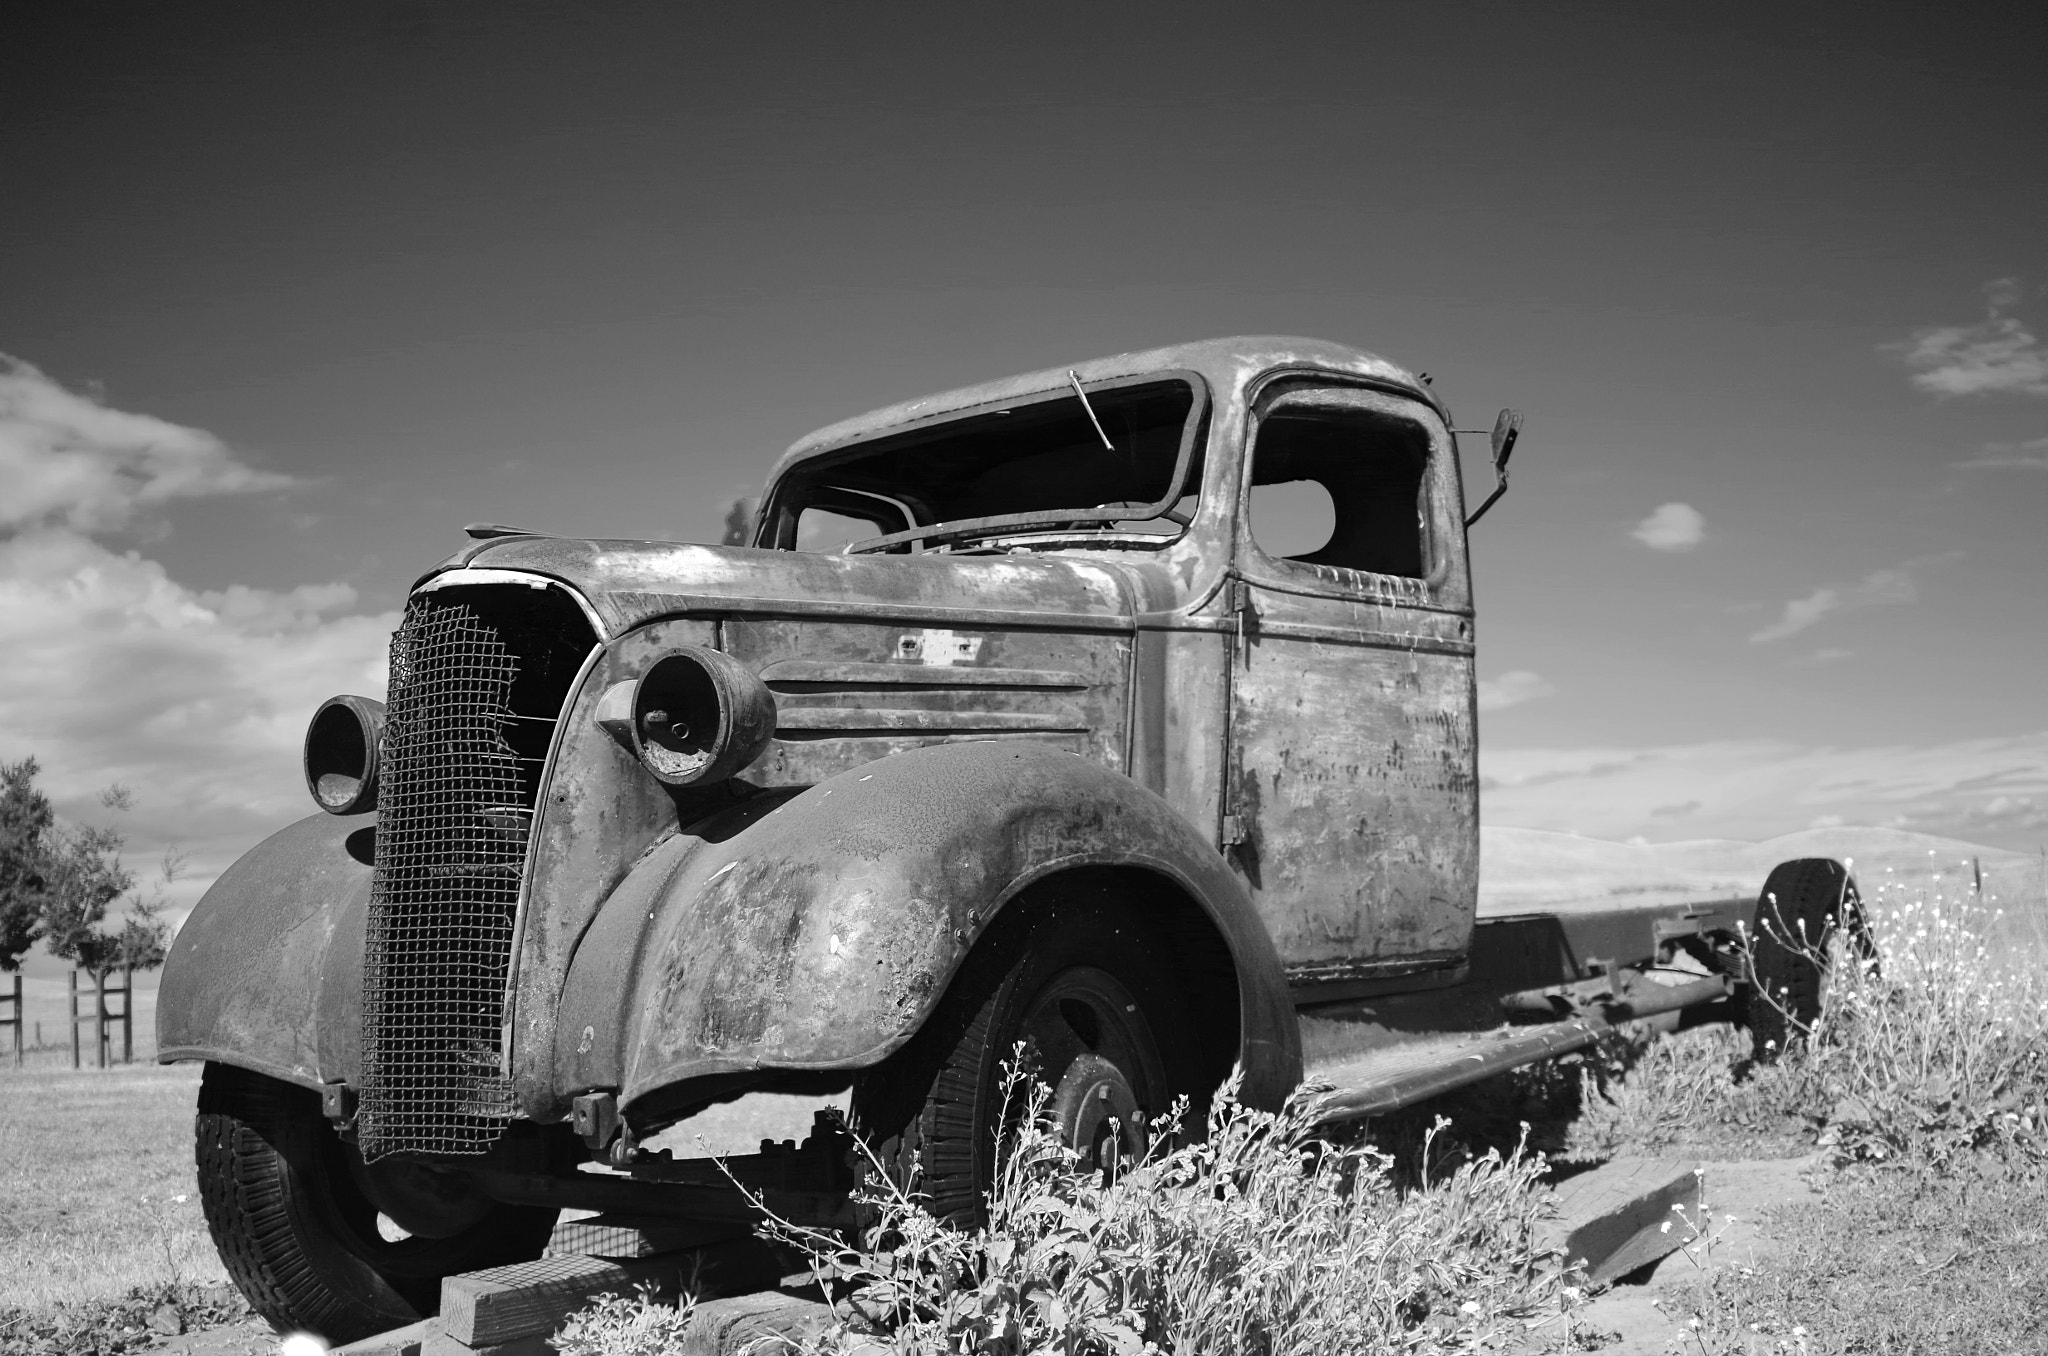 Pentax K-30 sample photo. Left over from the dust bowl photography